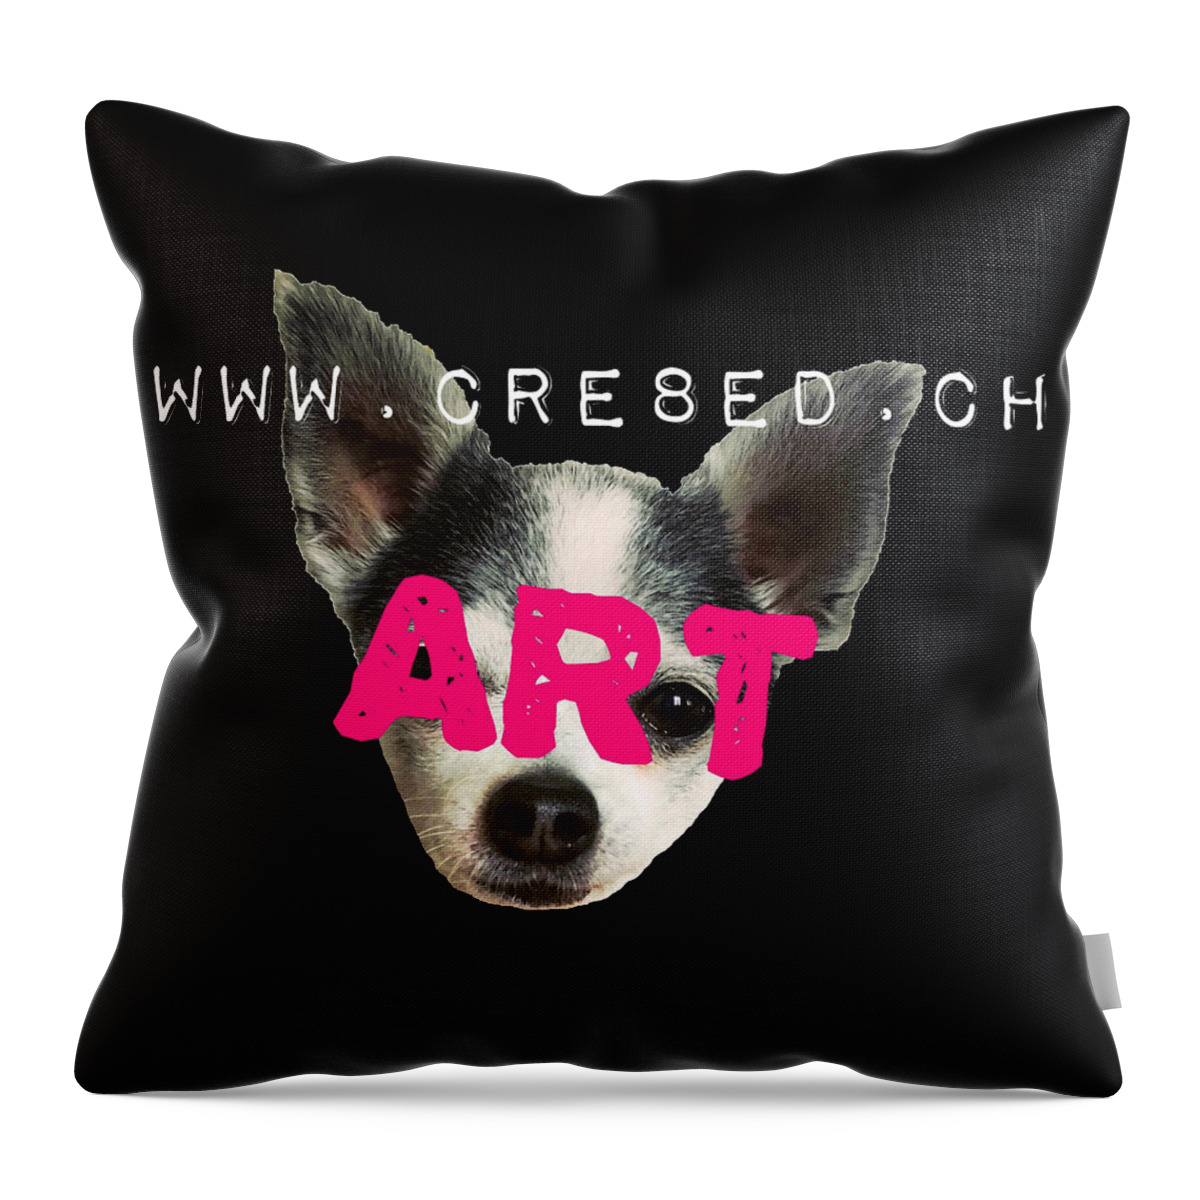 Www.cre8ed.ch Throw Pillow featuring the digital art Cre8ed by Tanja Leuenberger